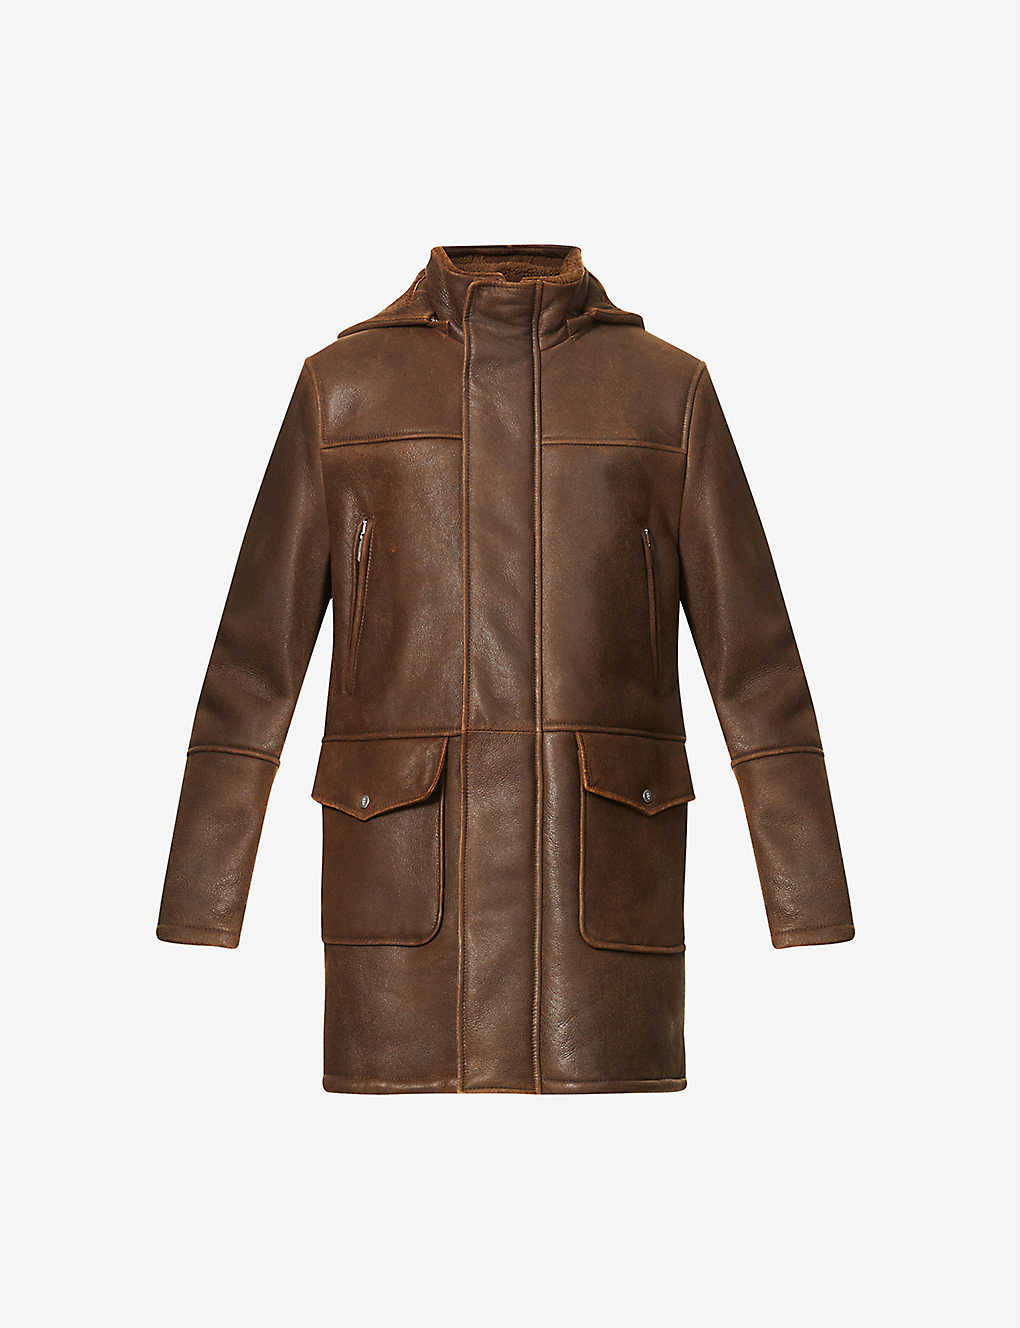 Men's Removable Hooded Brown Leather Shearling Trench Coat